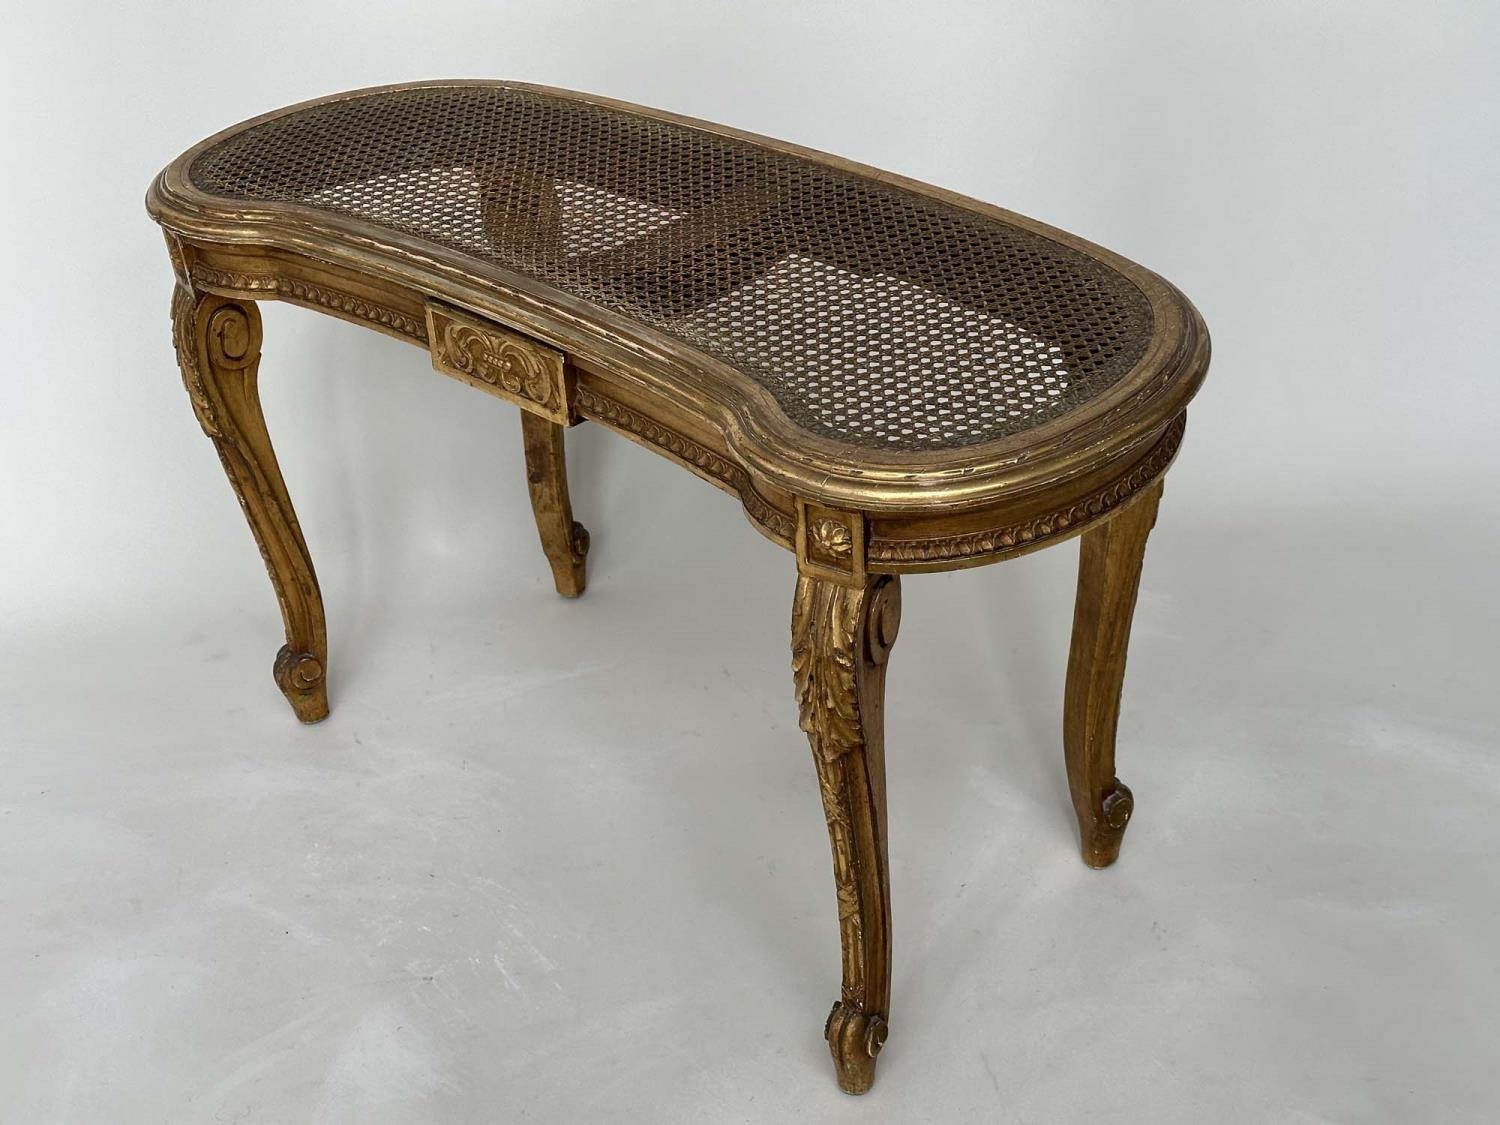 WINDOW SEAT, late 19th century French Louis XVI style giltwood with cane seat and carved tapering - Image 8 of 9